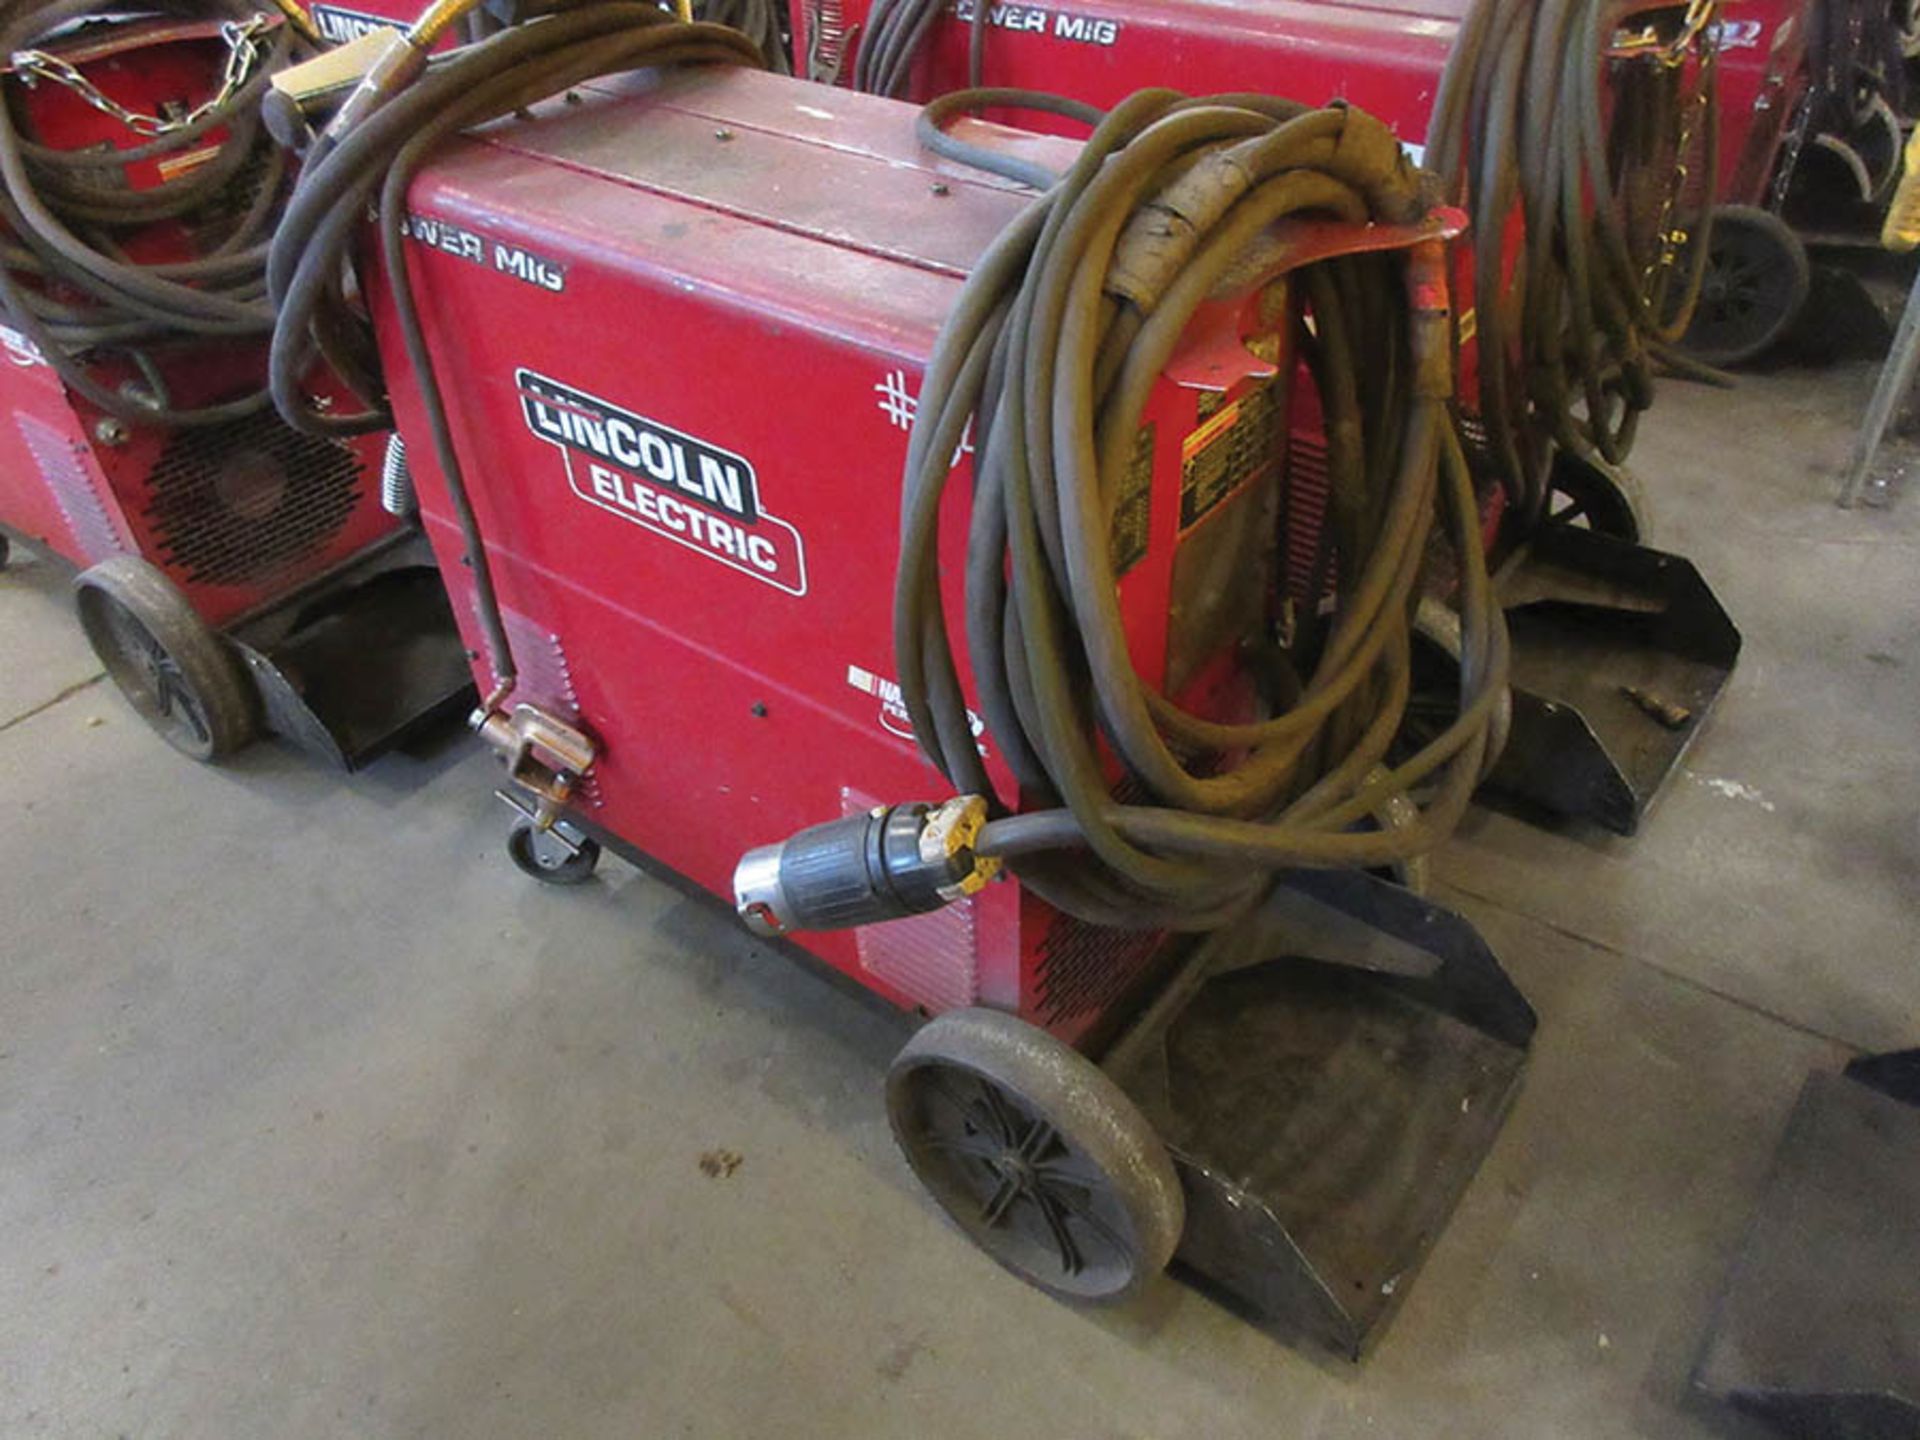 LINCOLN ELECTRIC 350MP POWER MIG WELDER WITH TWECO WELDSKILL MIG GUN, #34 - Image 2 of 3